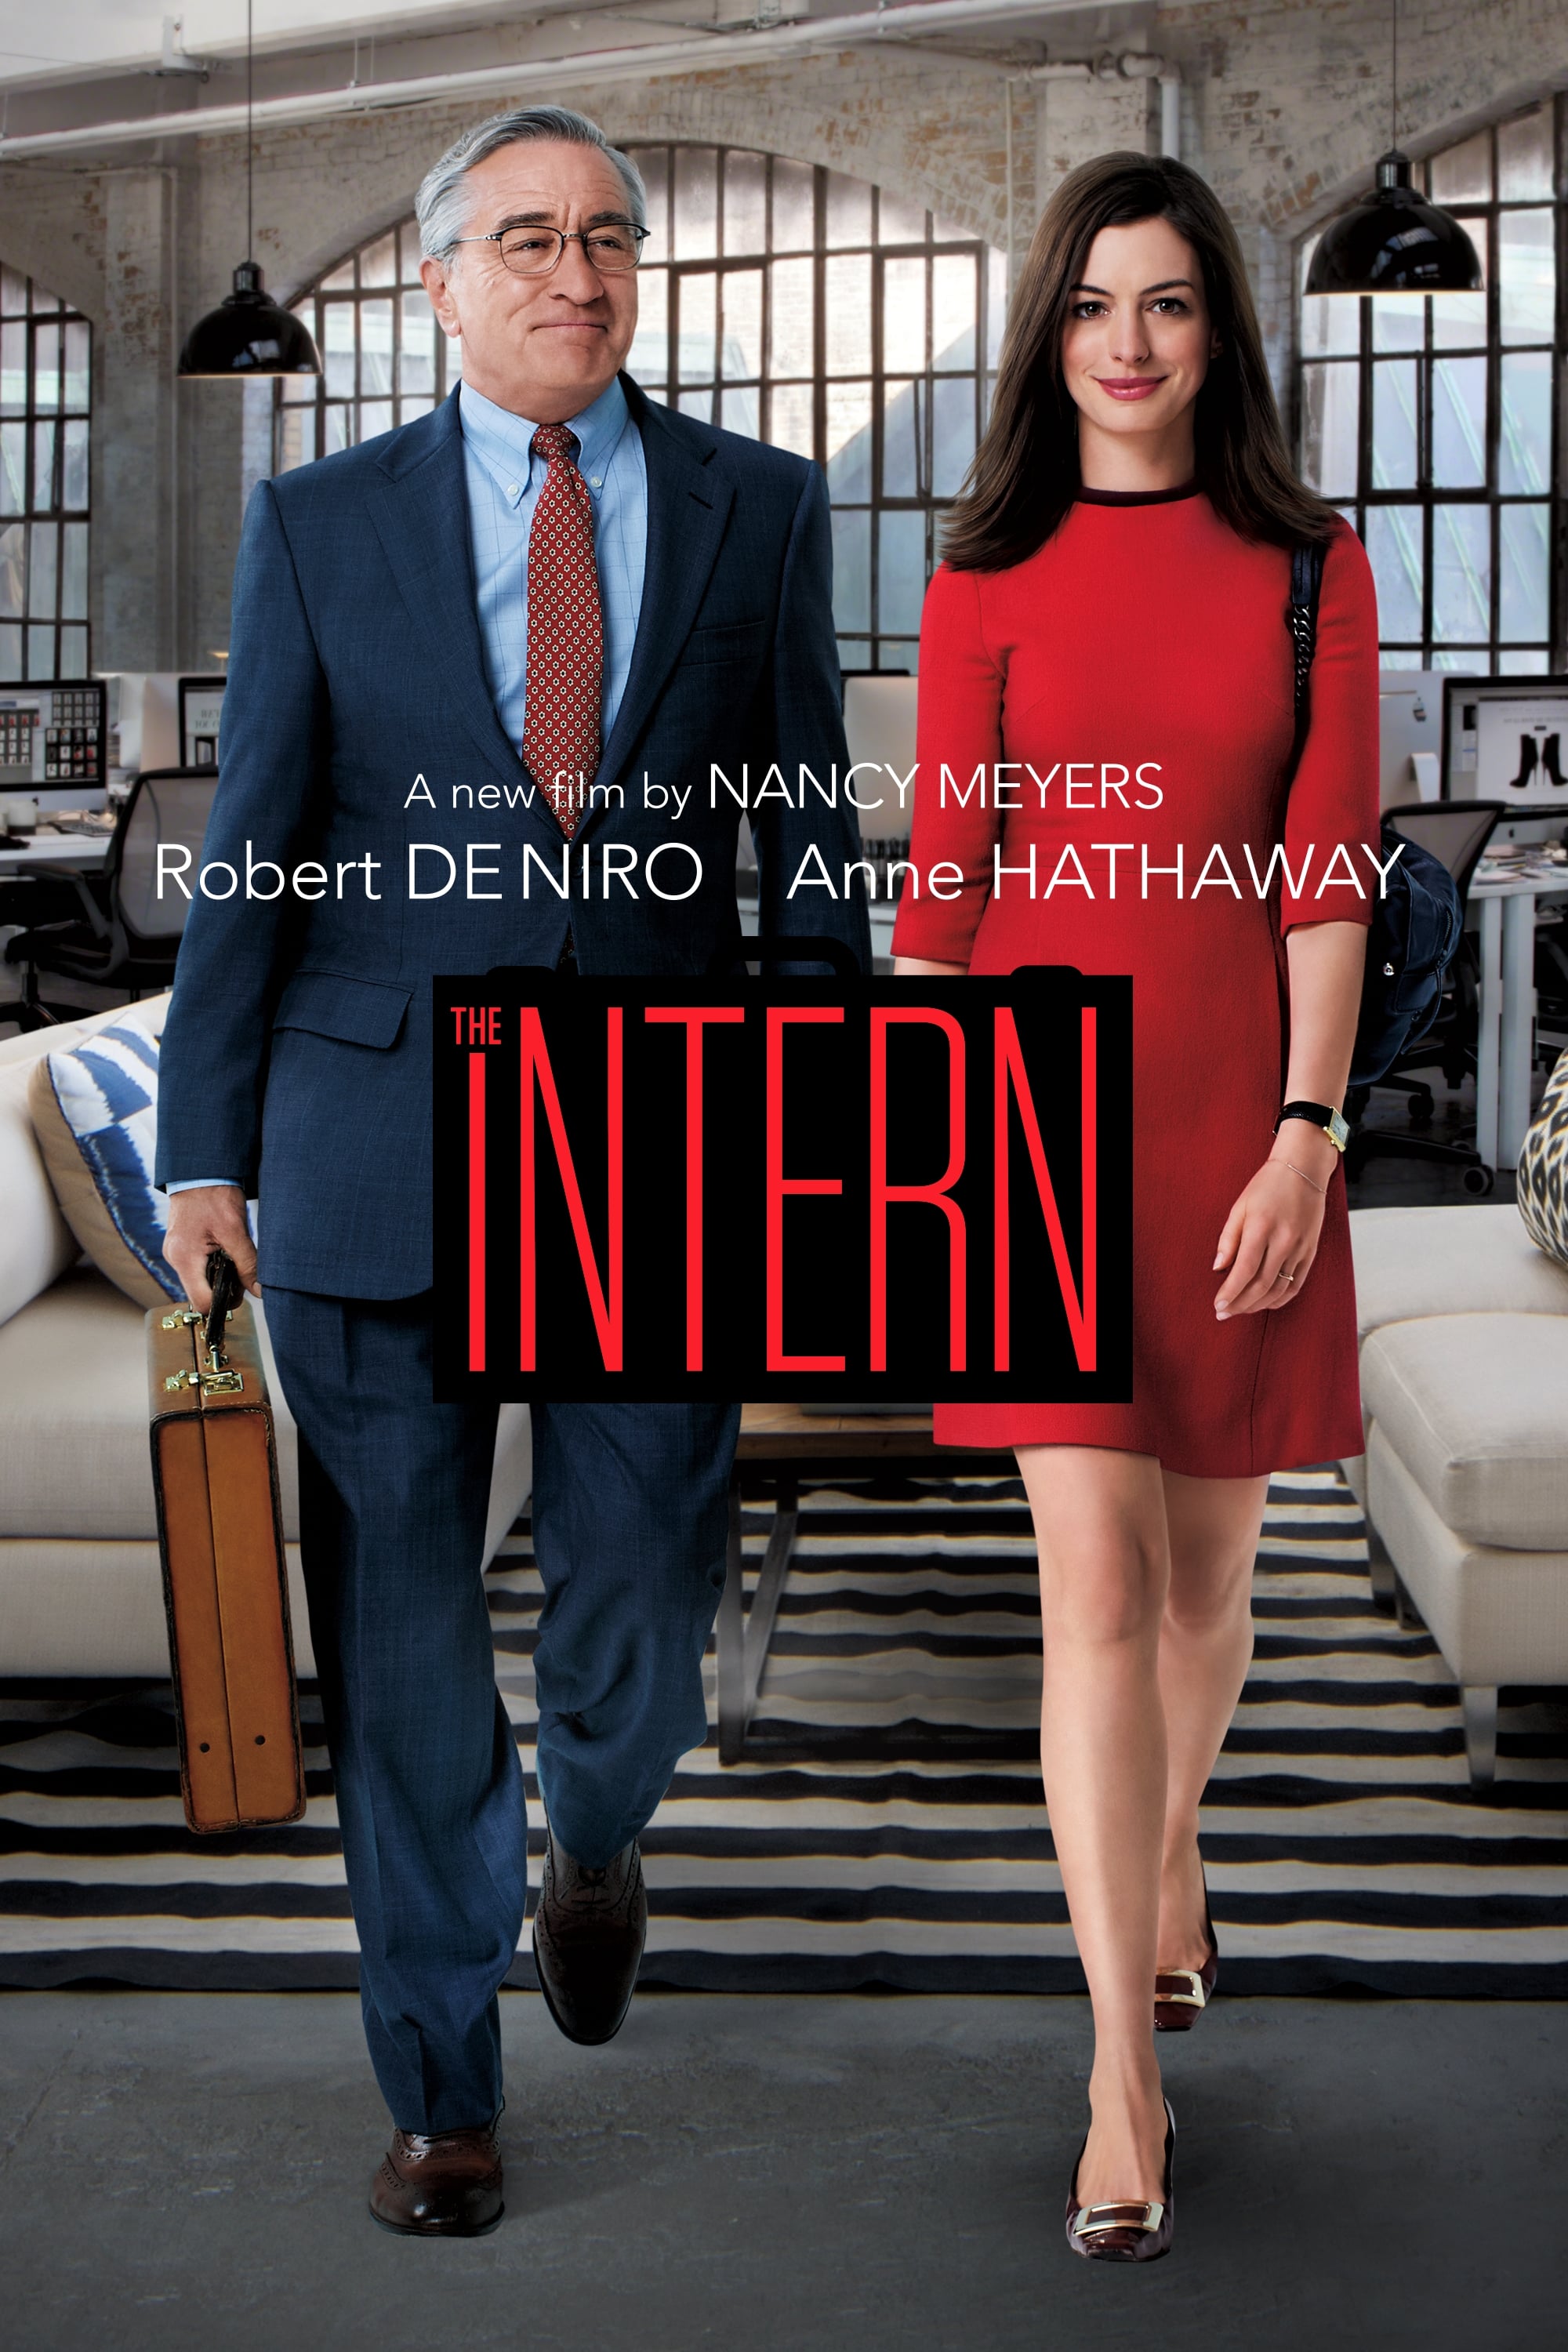 the intern movie review essay